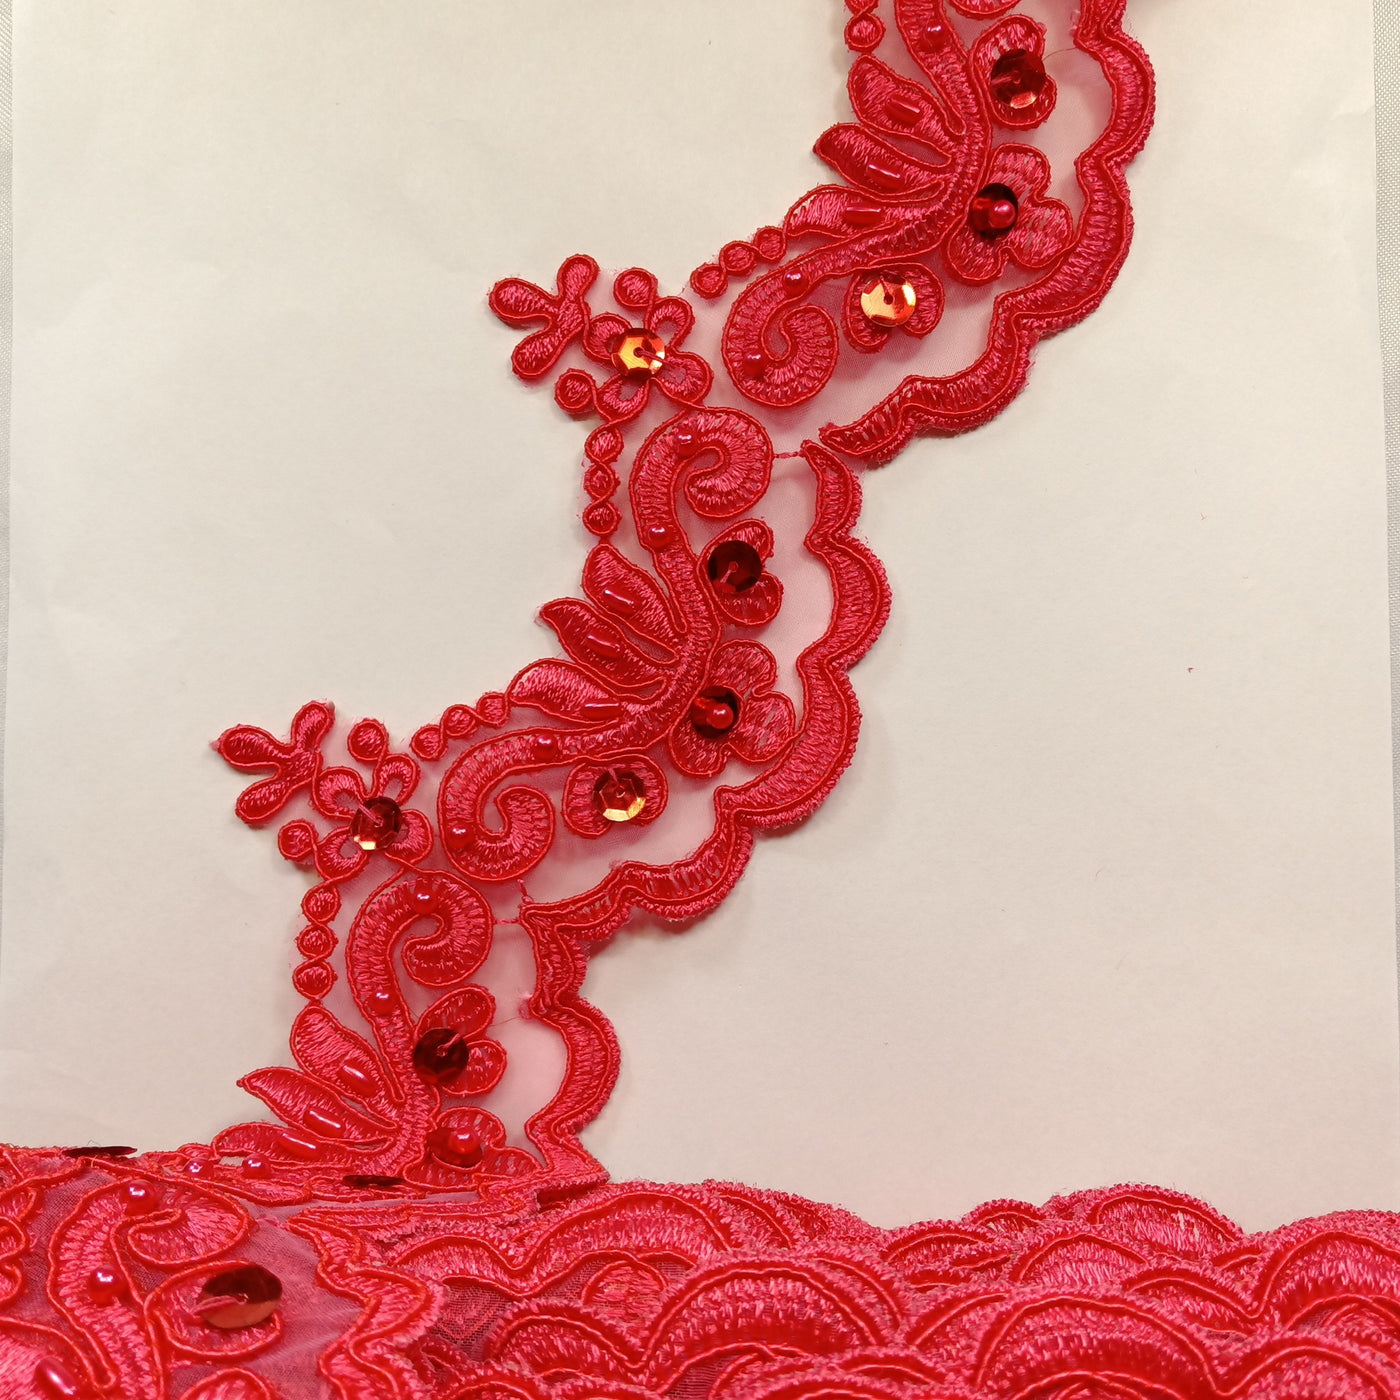 Corded, Beaded & Embroidered Coral Trimming. Lace Usa